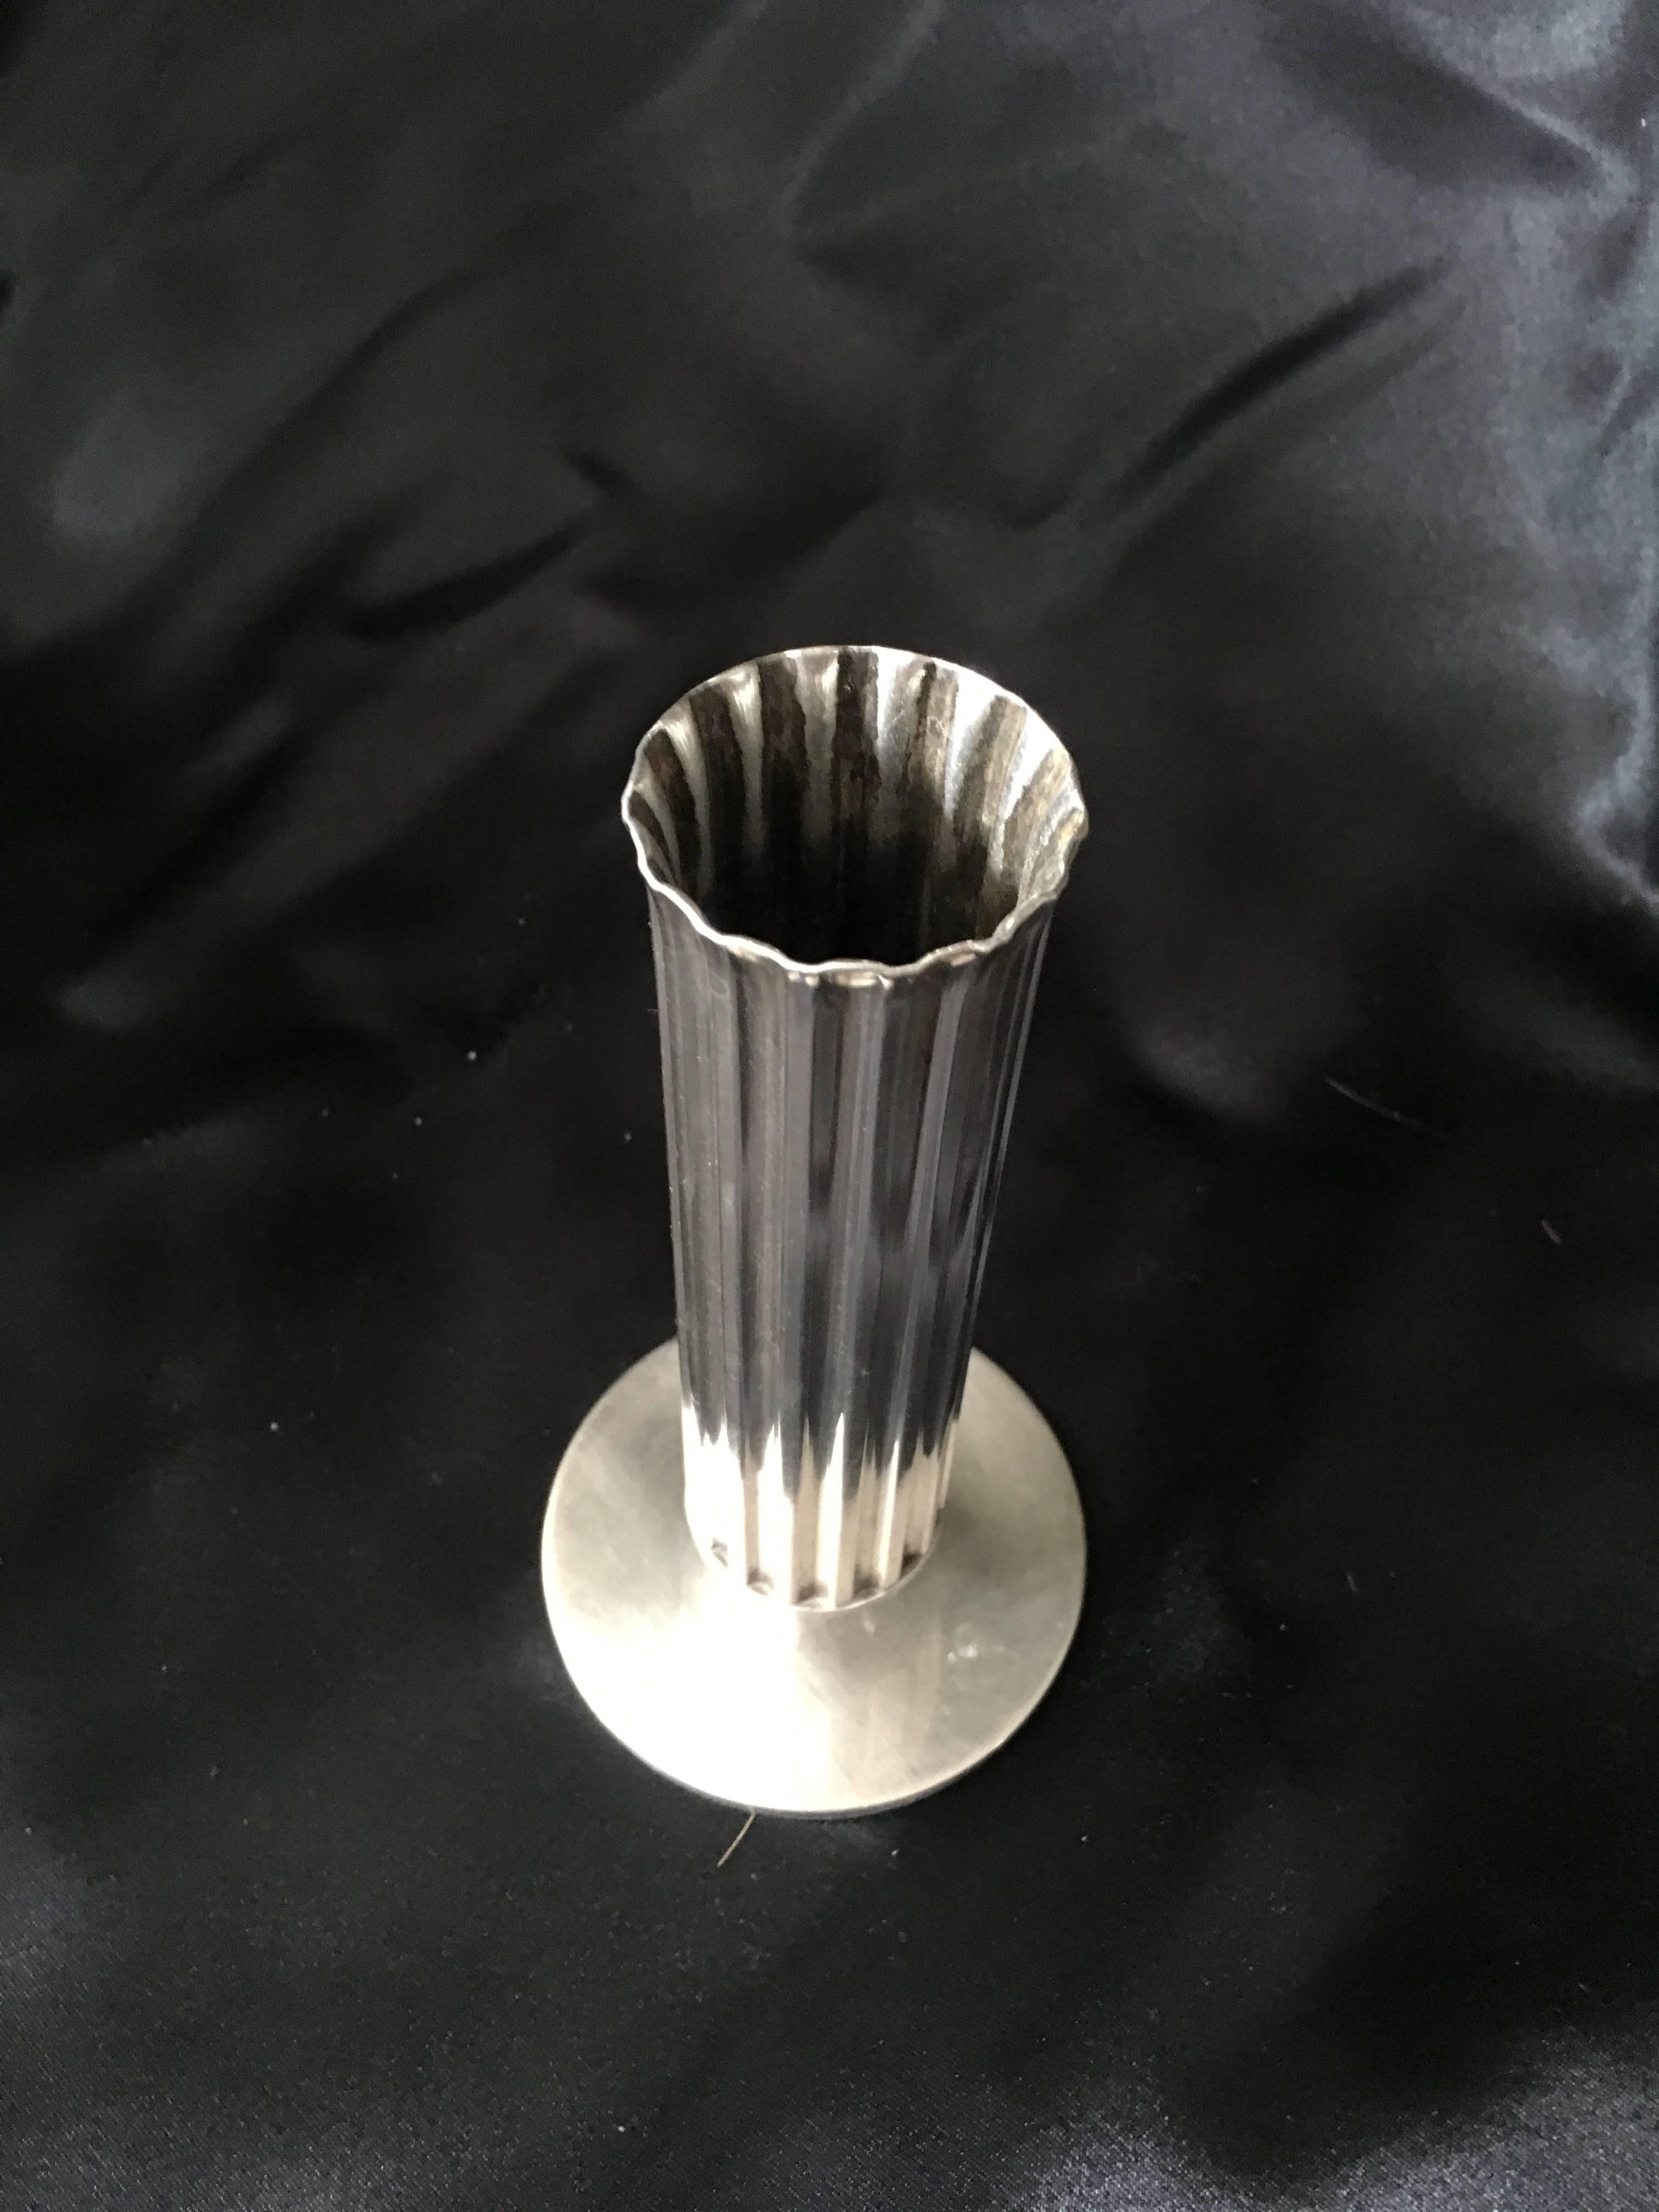 Silver plate ribbed bud vase 

Great for any desk, shelf or counter... a lovely and sophisticated bud vase that holds anywhere from a single stem to a small bouquet